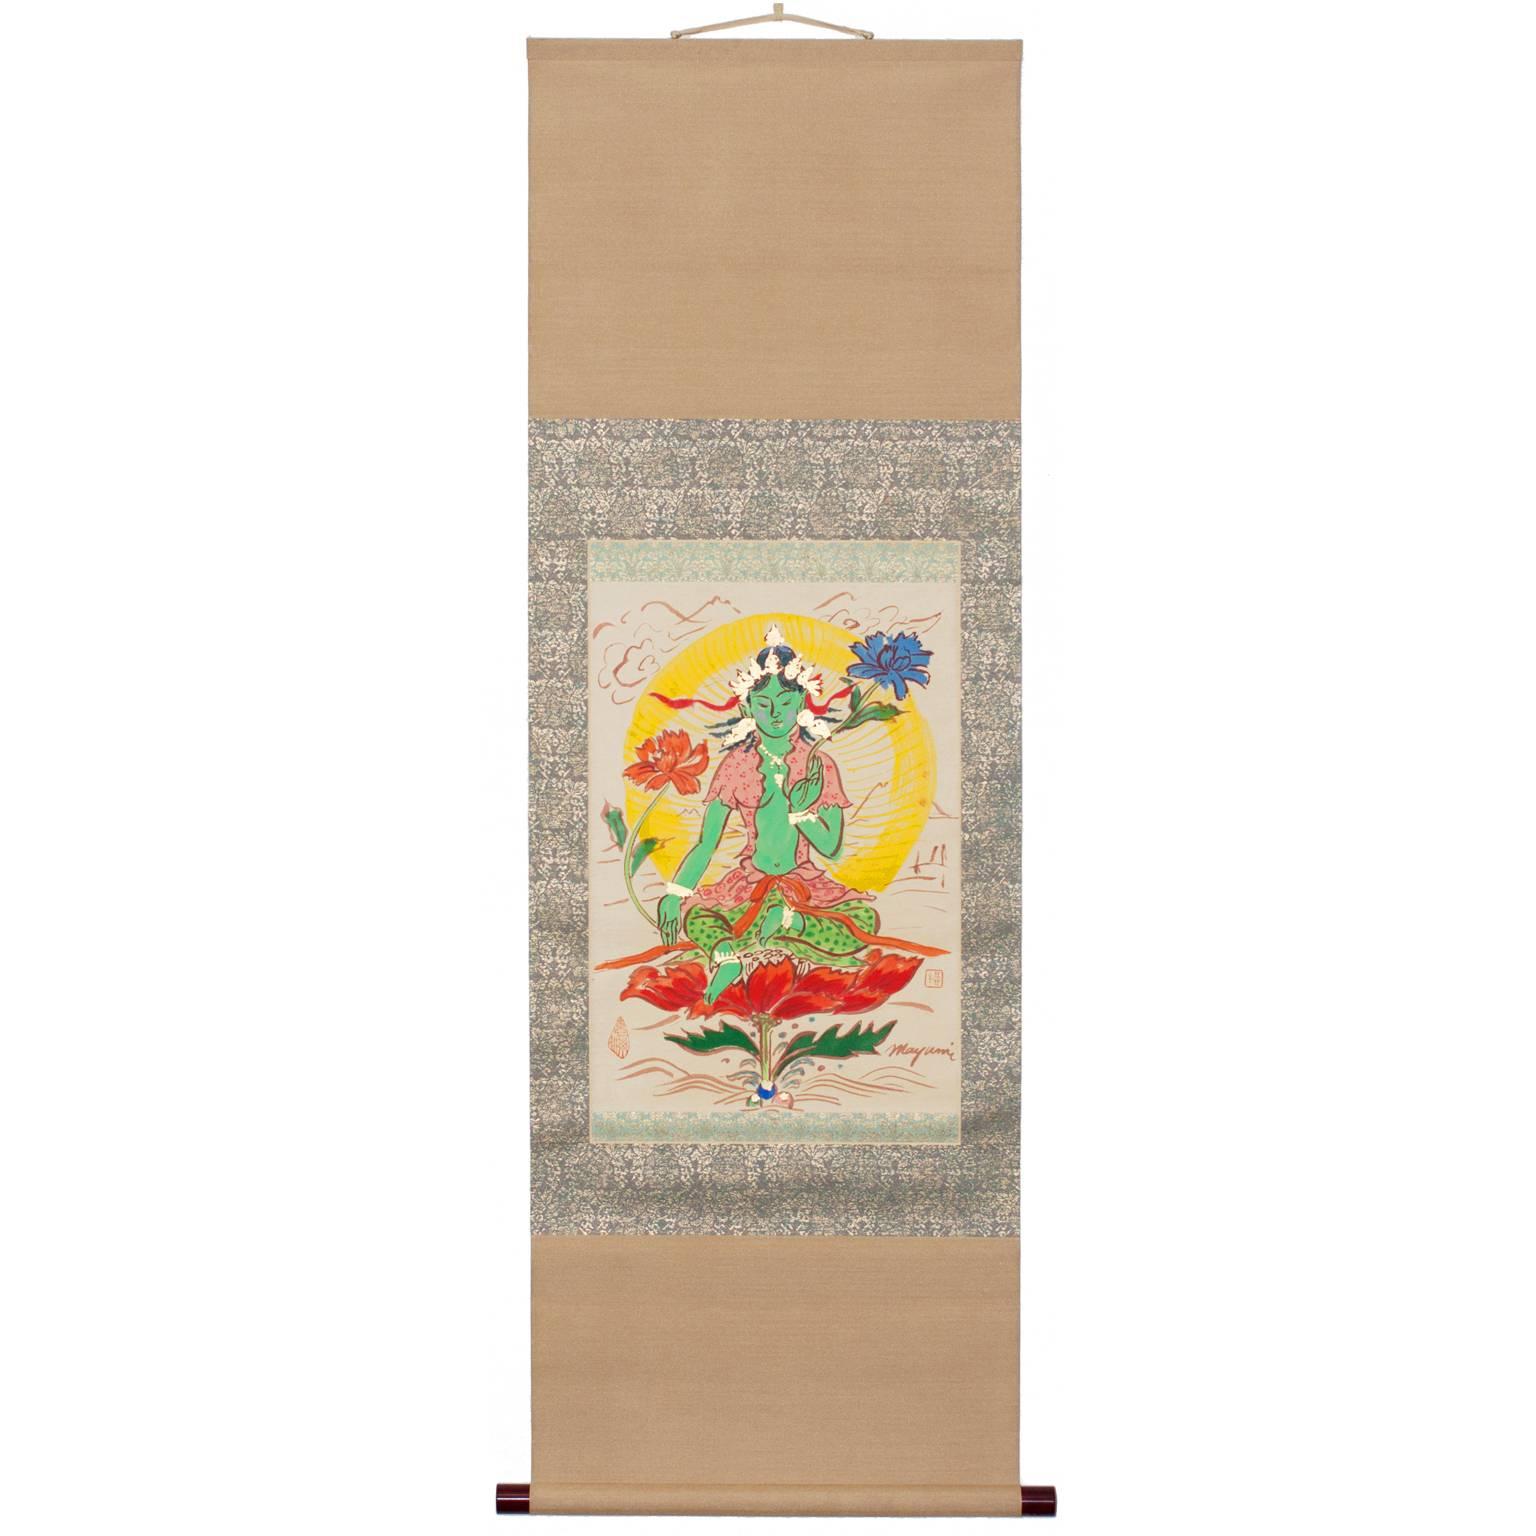 Original painting of Green Tara, the Bodhisattva of action and enlightened activity.  Painted with traditional pigments on handmade Udagami washi paper from Nara, mounted as a scroll in Nara by Shosaku Yoshimura using traditional Japanese materials